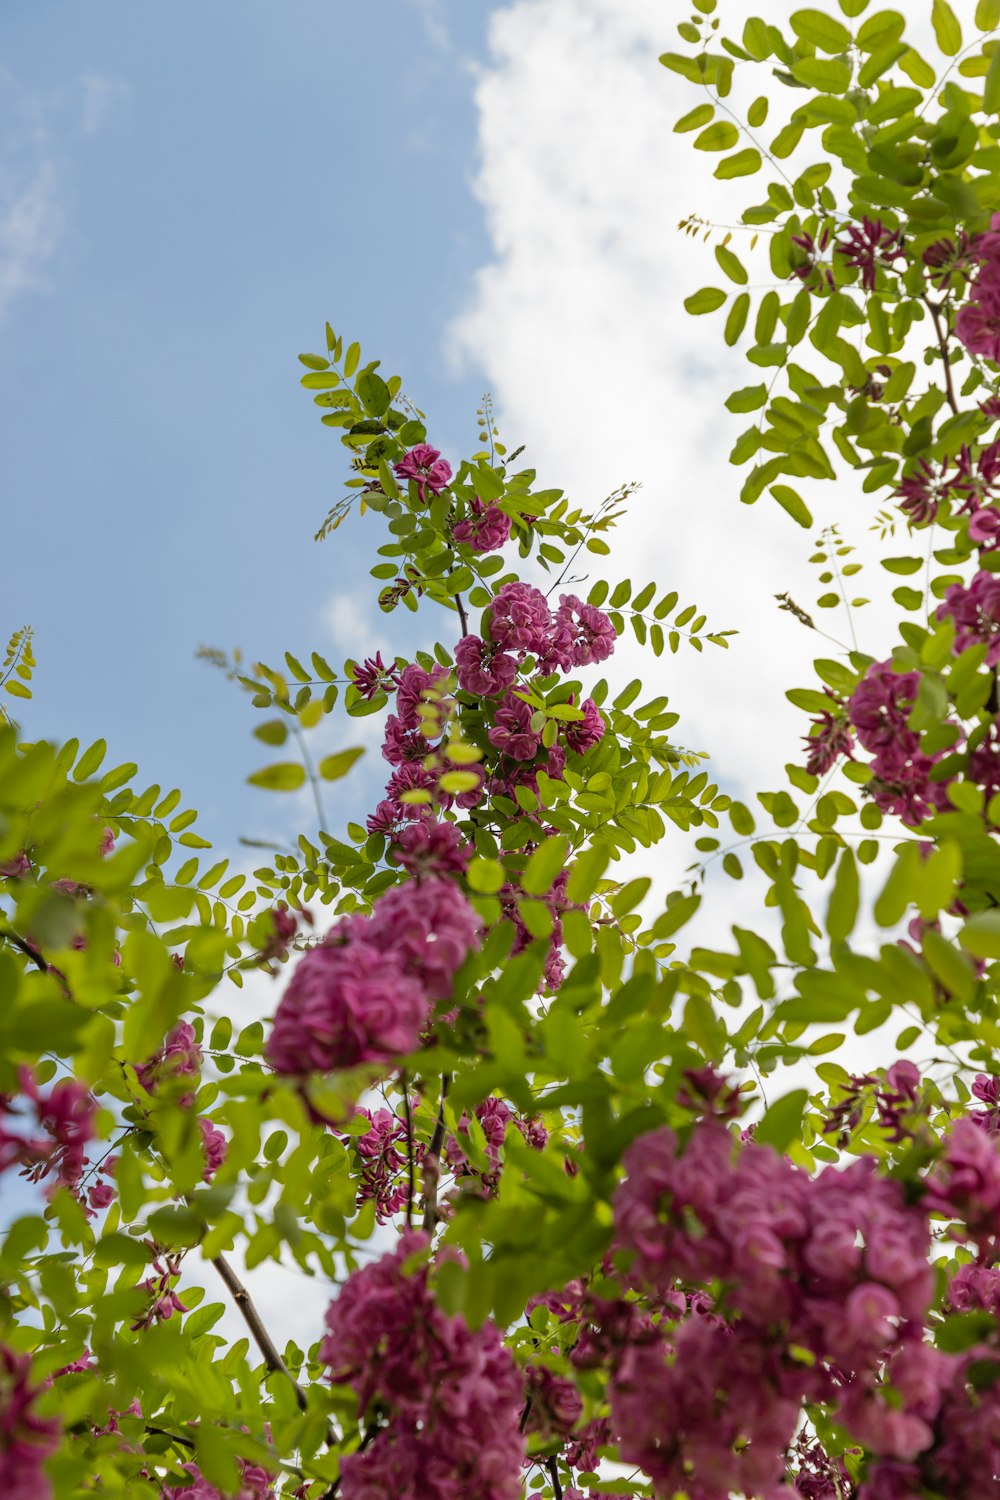 pink flowers with green leaves under blue sky during daytime